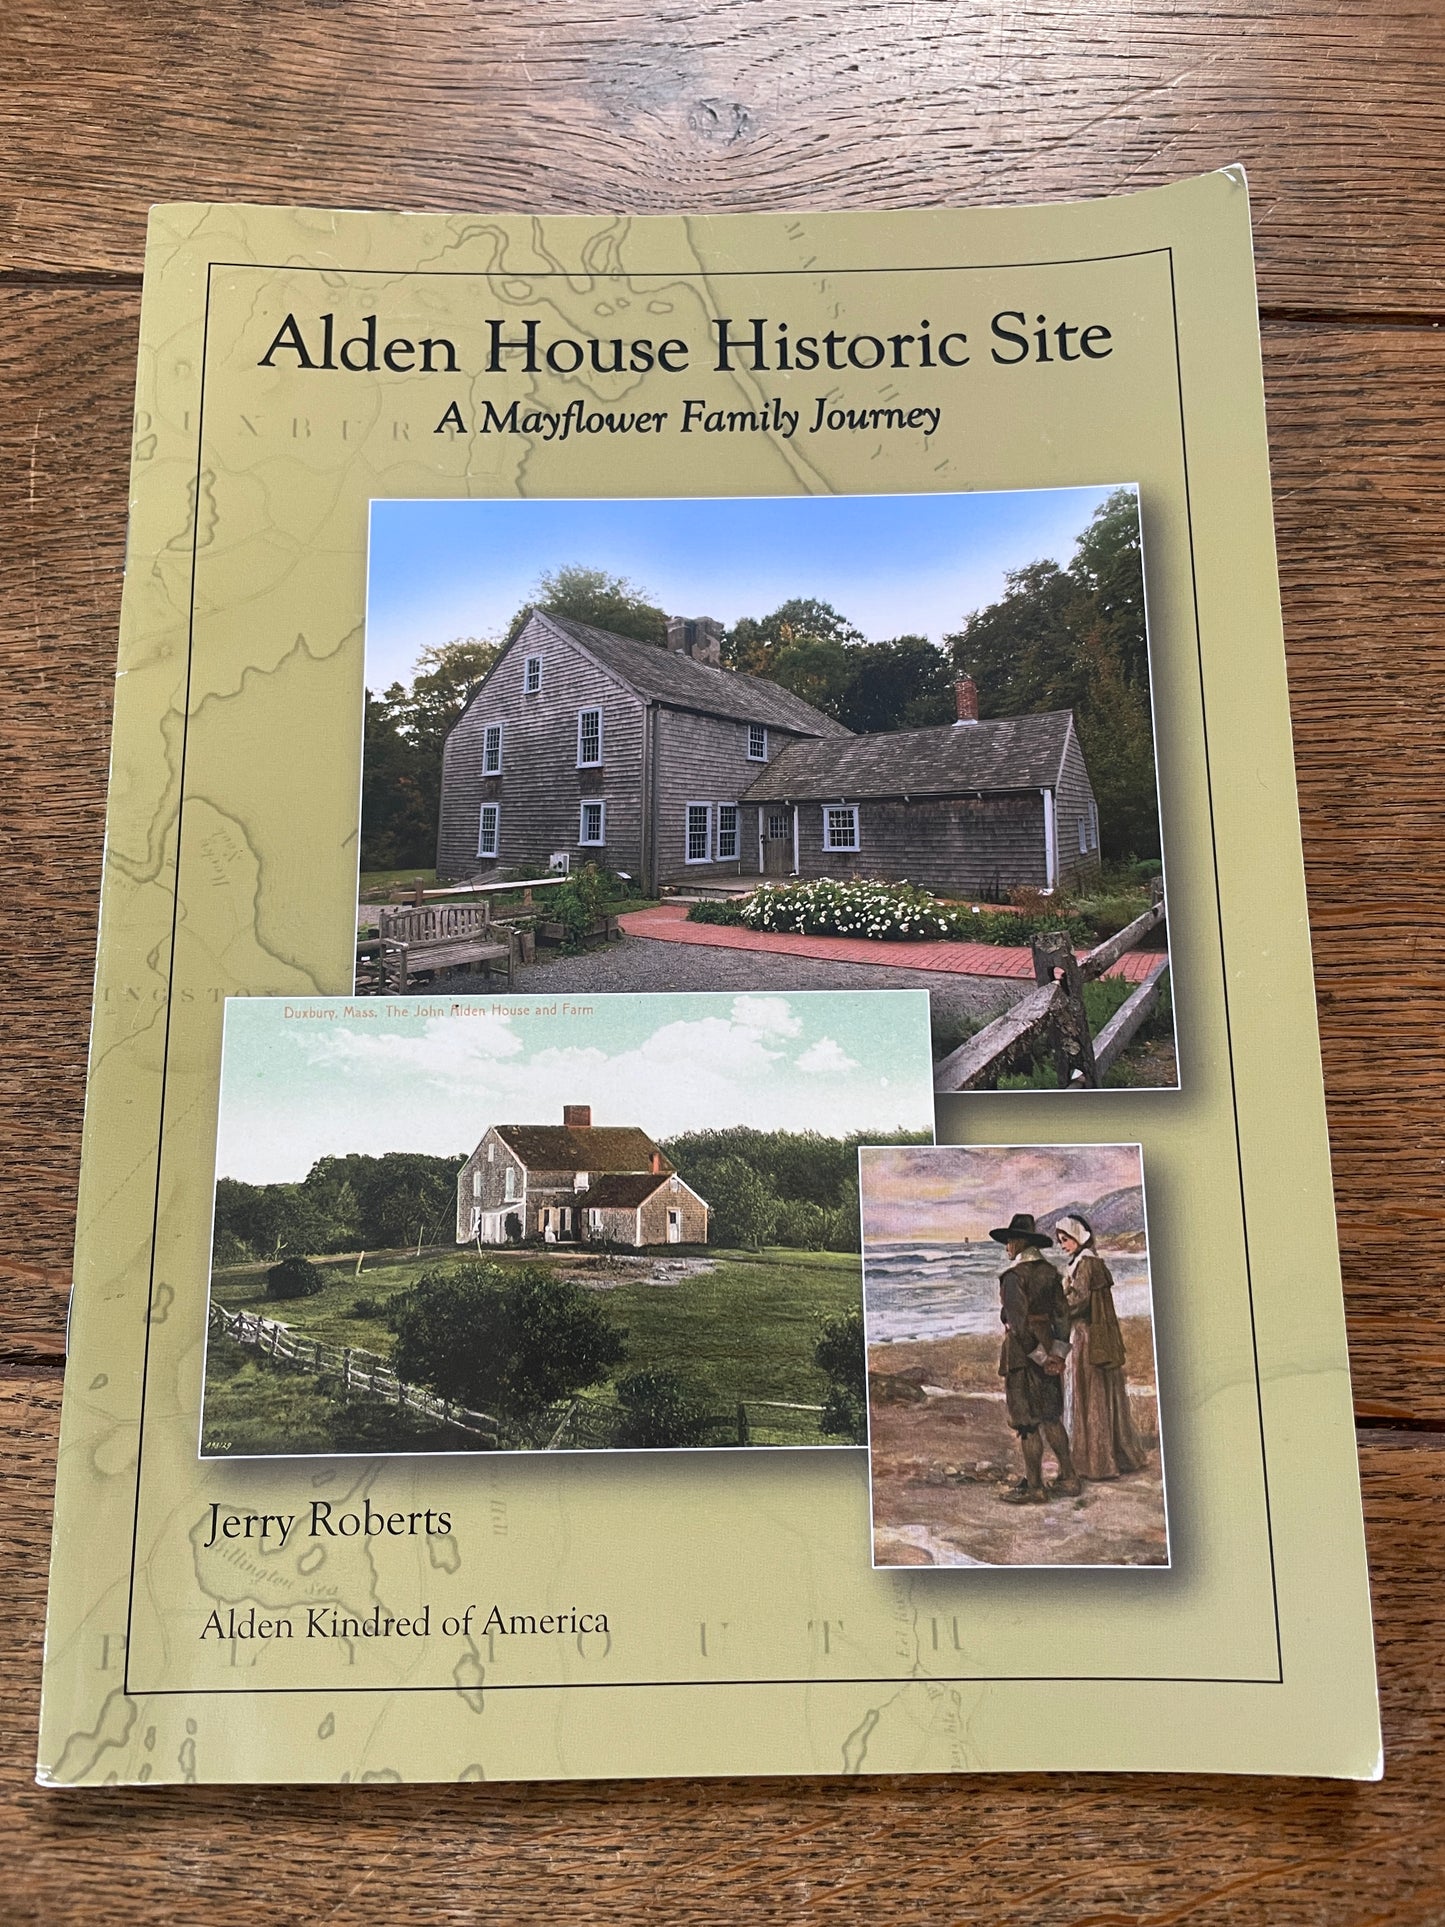 Alden House Historic Site. A Mayflower Family Journey by Jerry Roberts